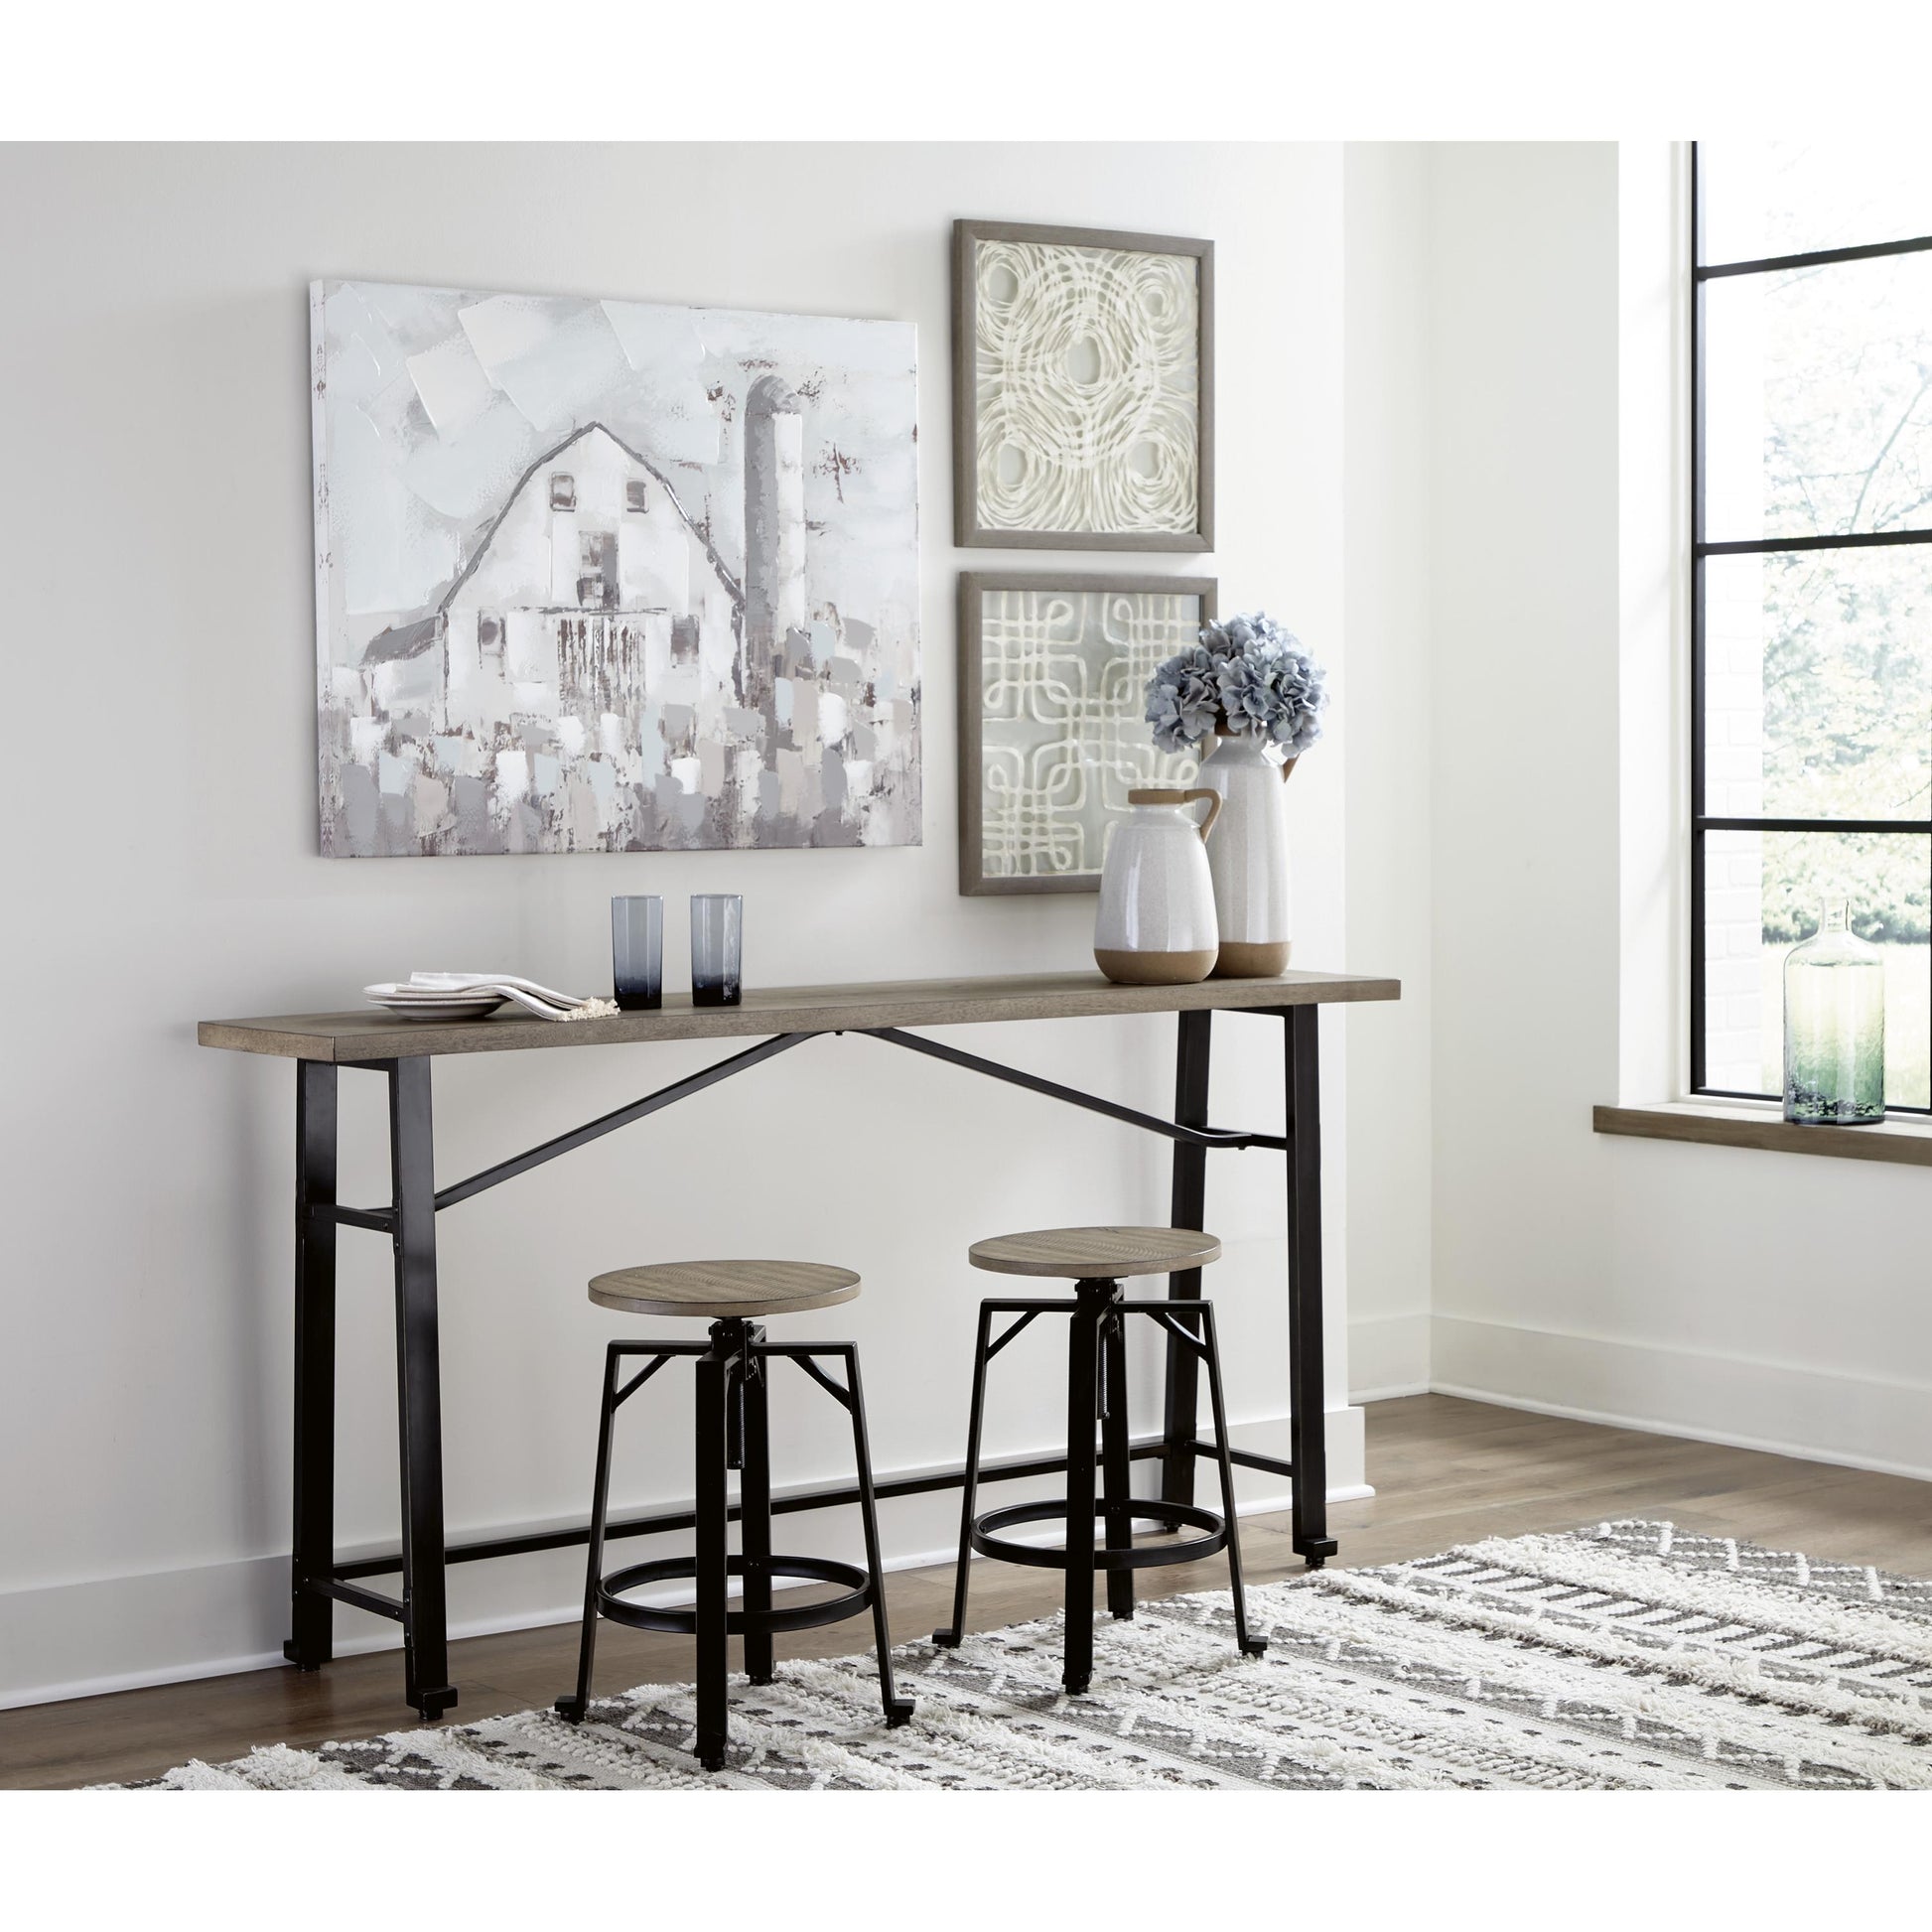 Signature Design by Ashley Lesterton Counter Height Dining Table with Trestle Base D334-52 IMAGE 15